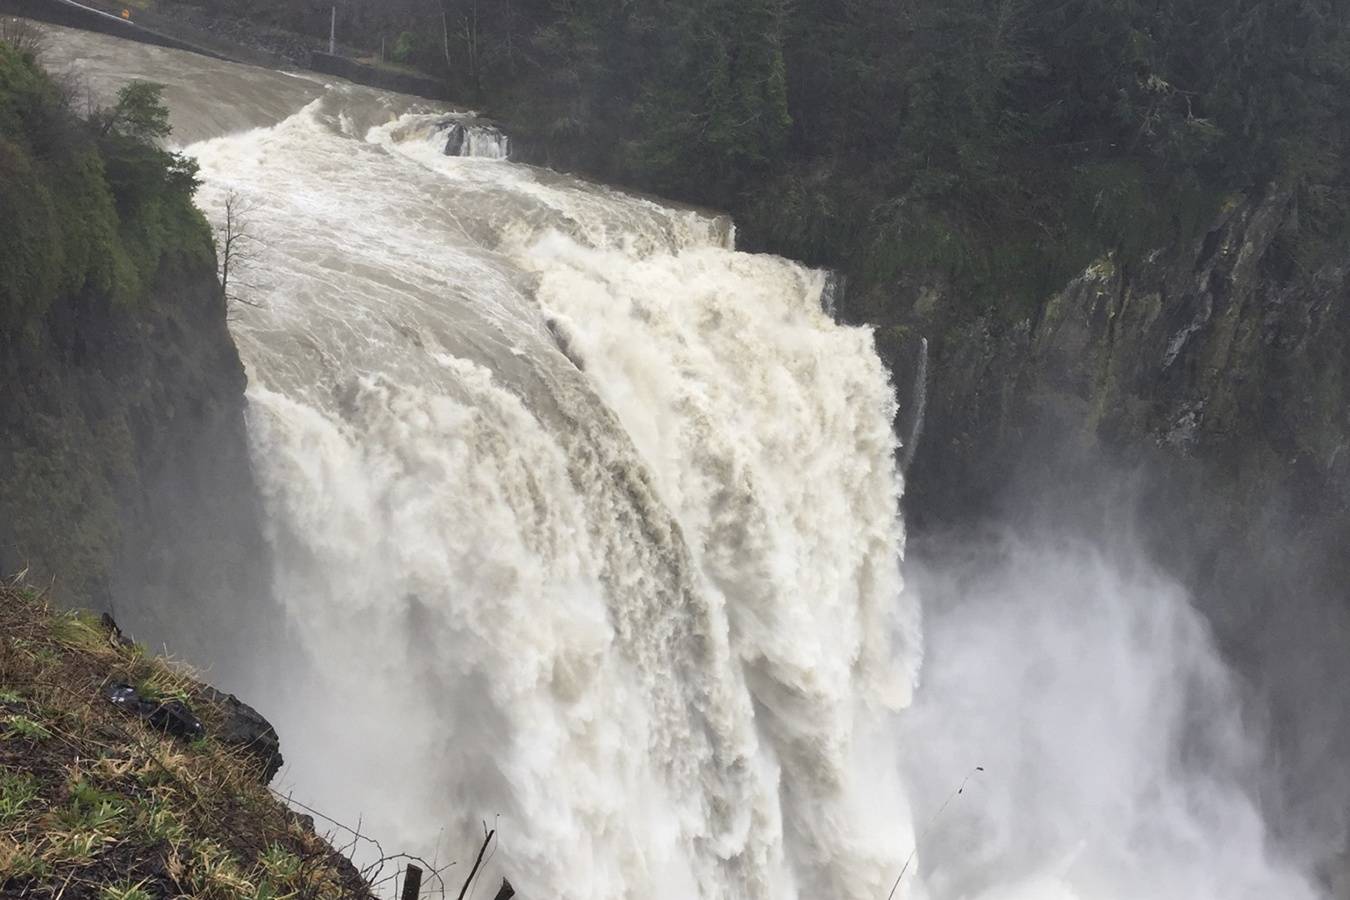 The Snoqualmie Falls ran heavy with flood water on Feb. 7. William Shaw/staff photo